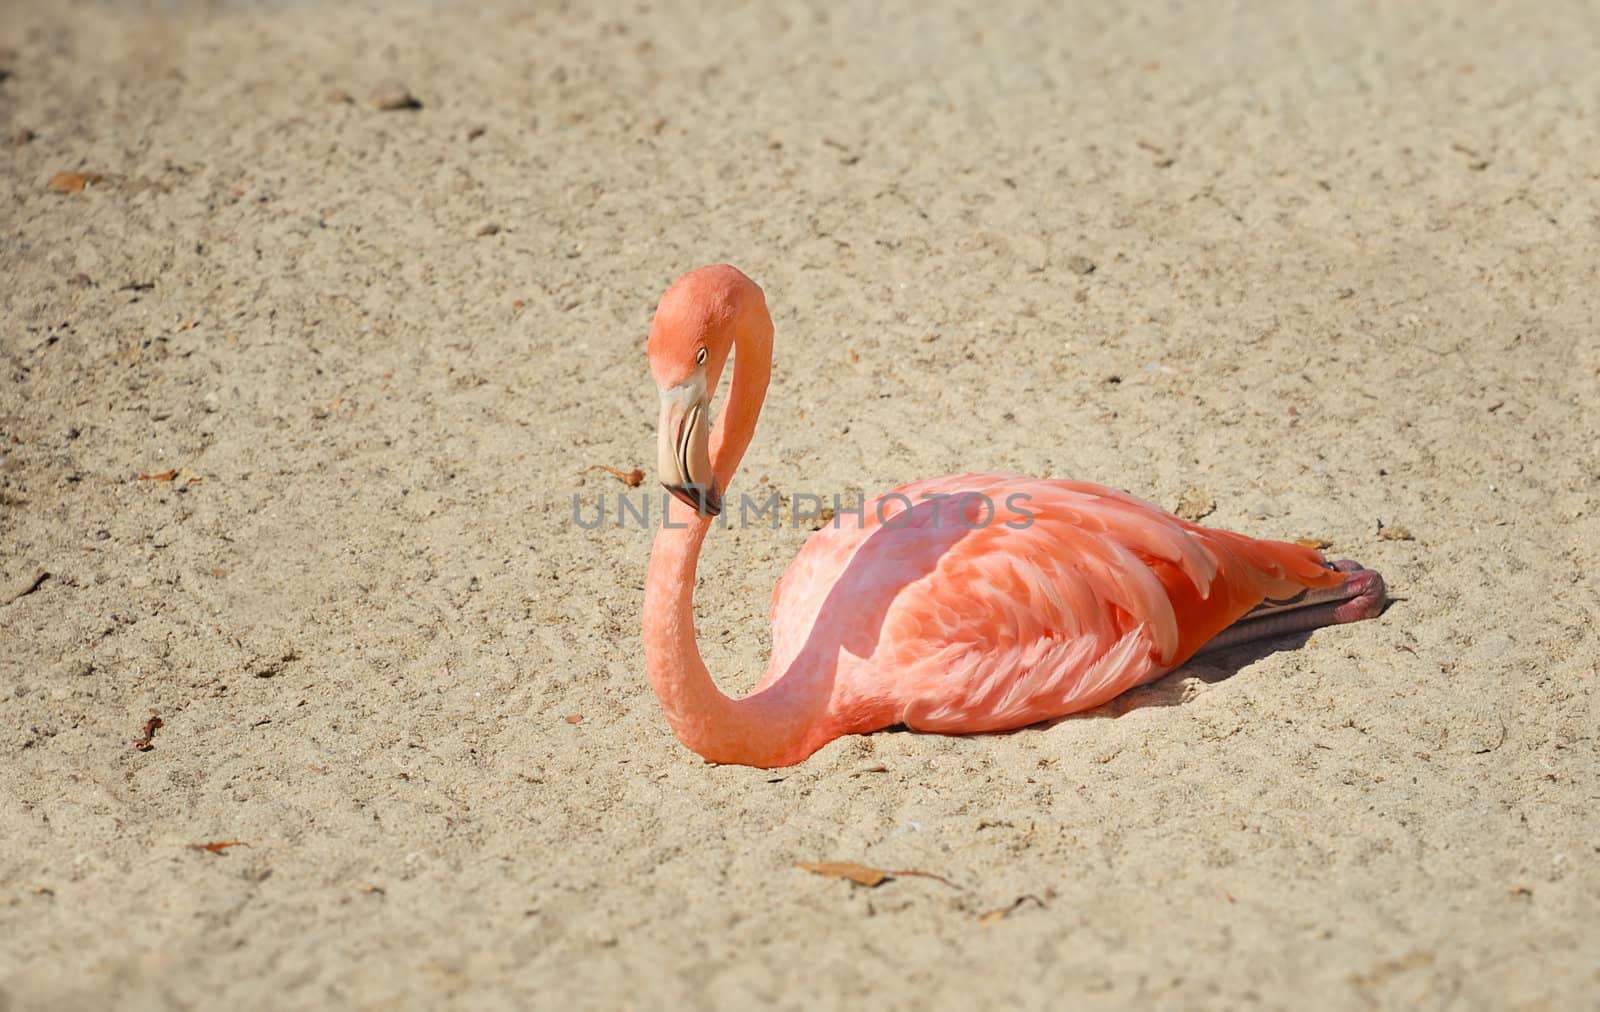 Flamingo is resting on the sand in the sun.